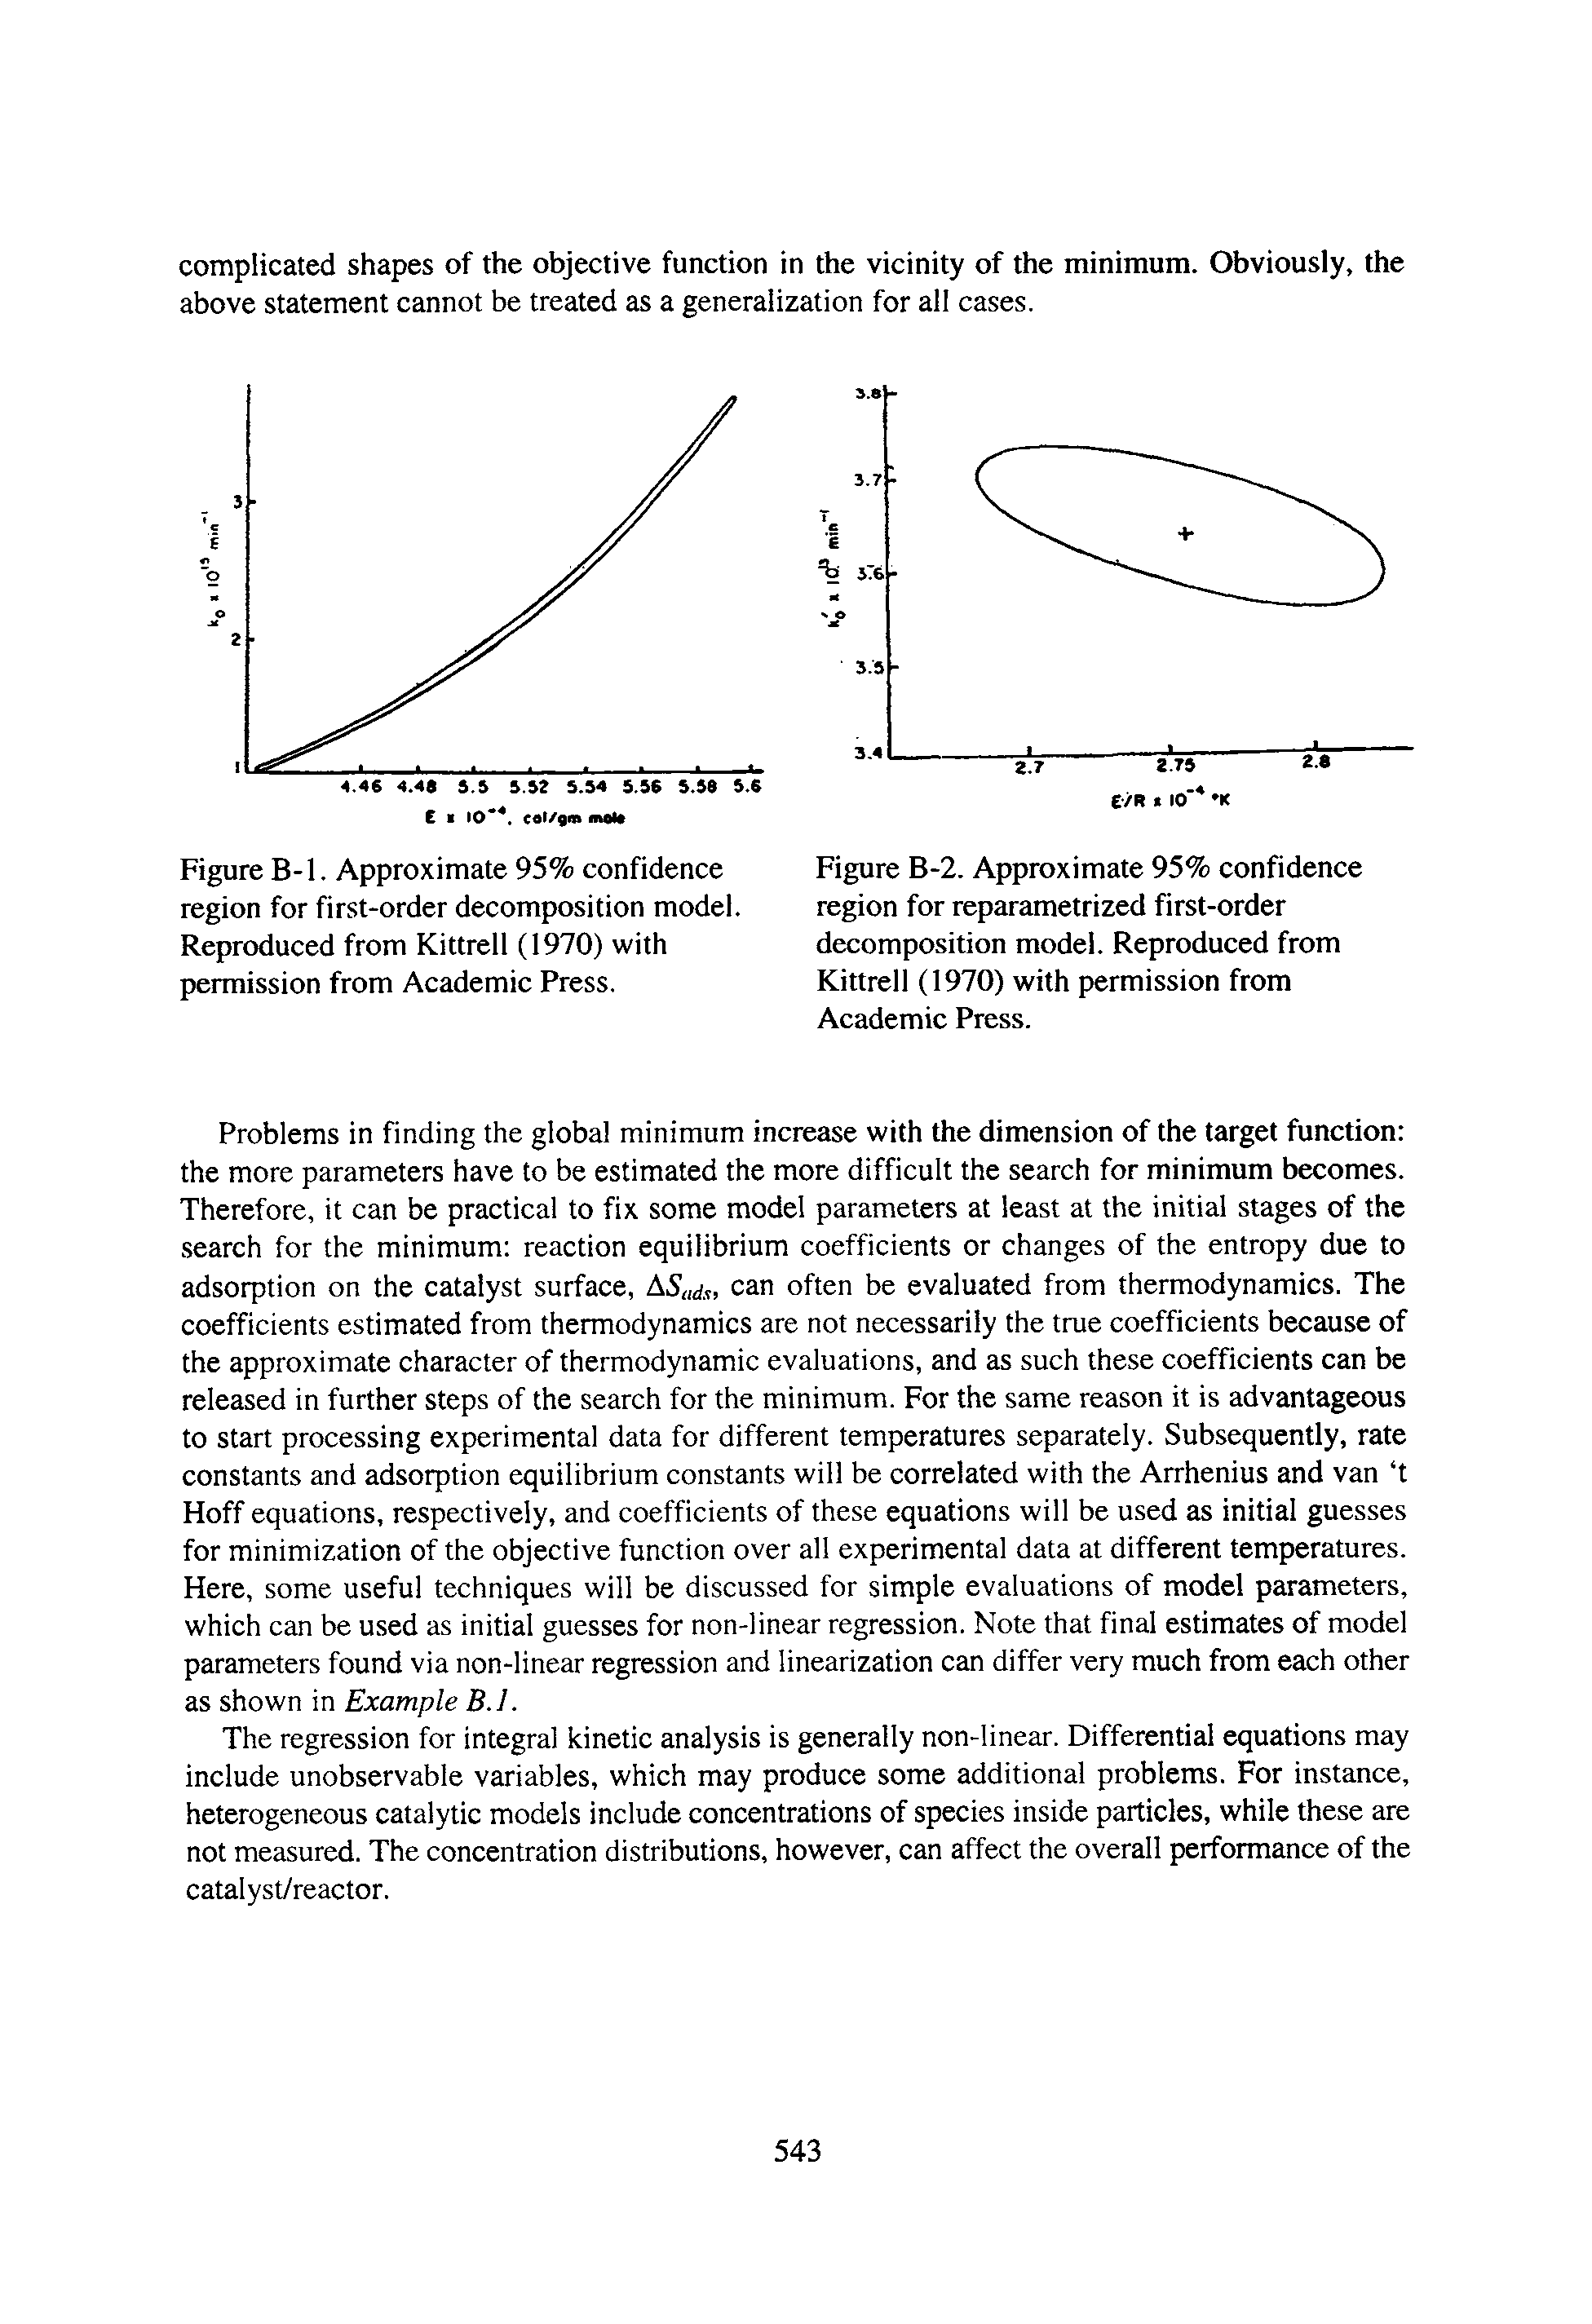 Figure B-1. Approximate 95% confidence region for first-order decomposition model. Reproduced from Kittrell (1970) with permission from Academic Press.